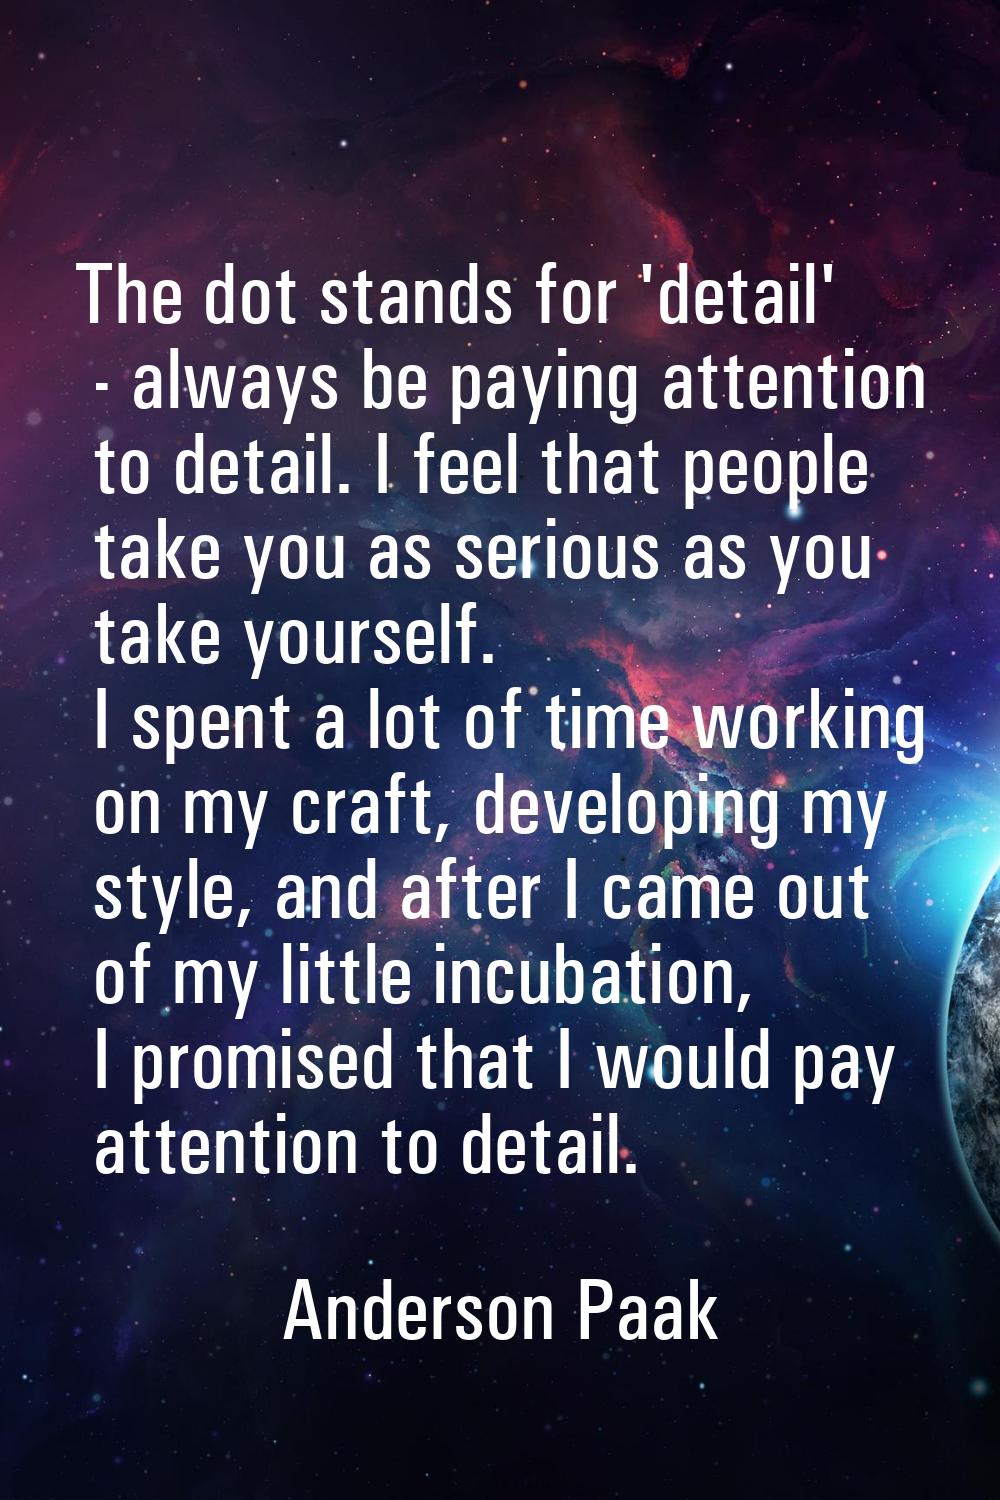 The dot stands for 'detail' - always be paying attention to detail. I feel that people take you as 